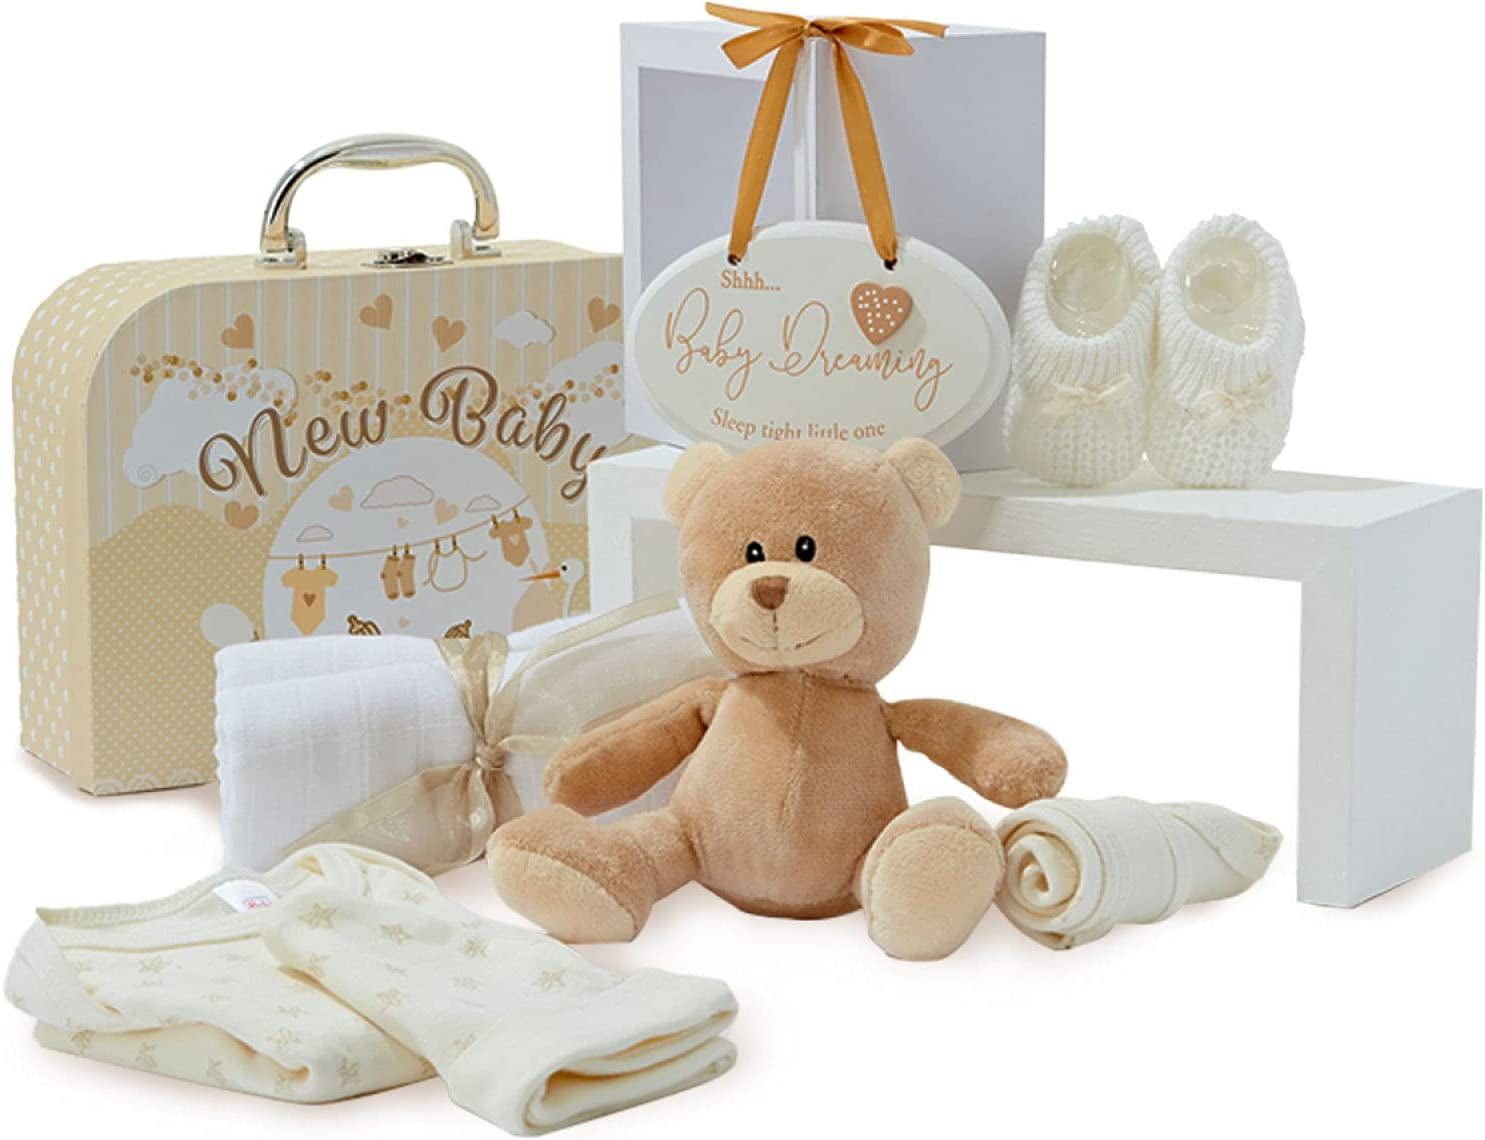 Baby Gifts Newborn Unisex - 7 Baby Gifts in a Neutral Baby Gift Set, Newborn Essentials and Baby Shower Gifts, Baby Hampers, Newborn Baby Presents, Welcome Gifts Baby Wishlist - Cream